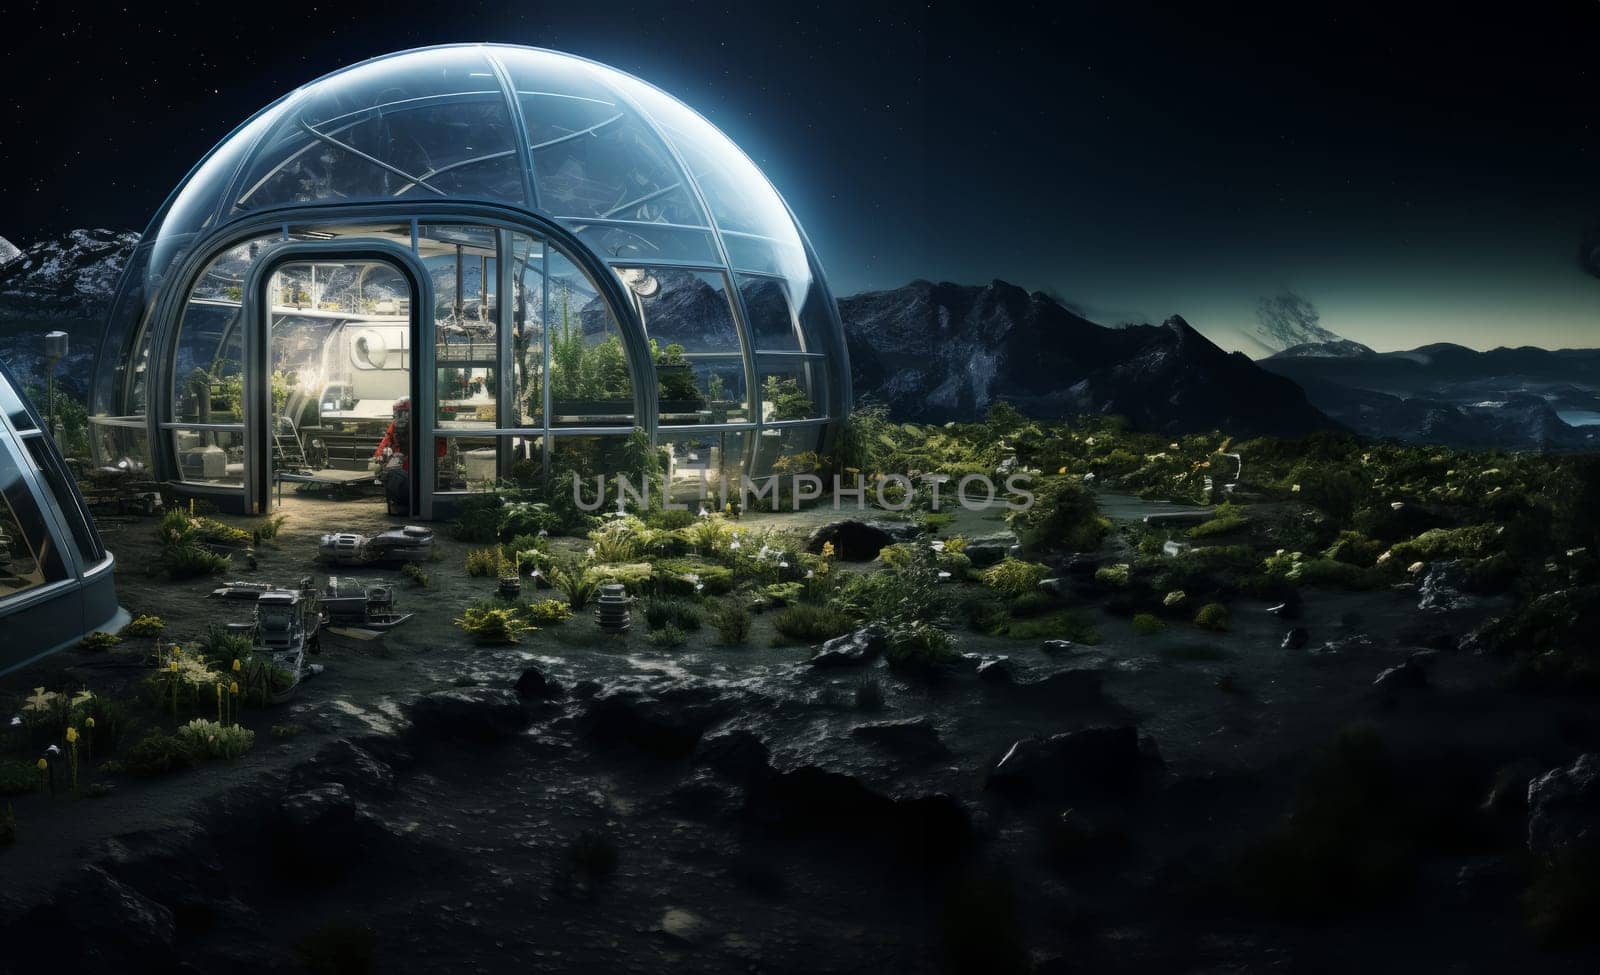 Earth Plants Thrive in Lunar Greenhouse.Generated image by dotshock